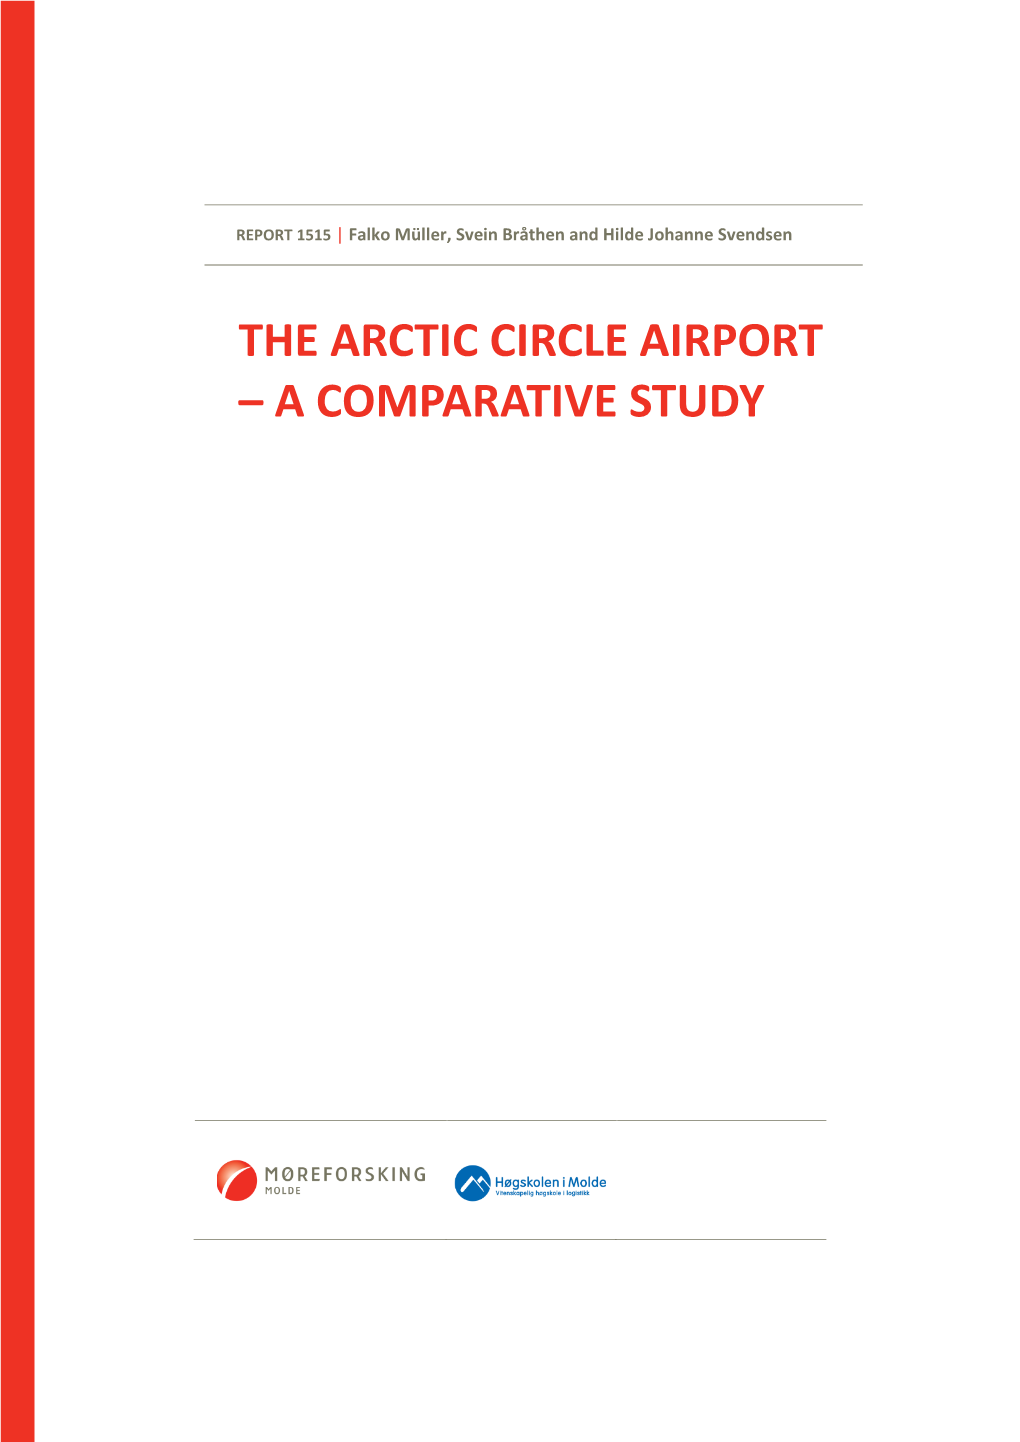 The Arctic Circle Airport – a Comparative Study